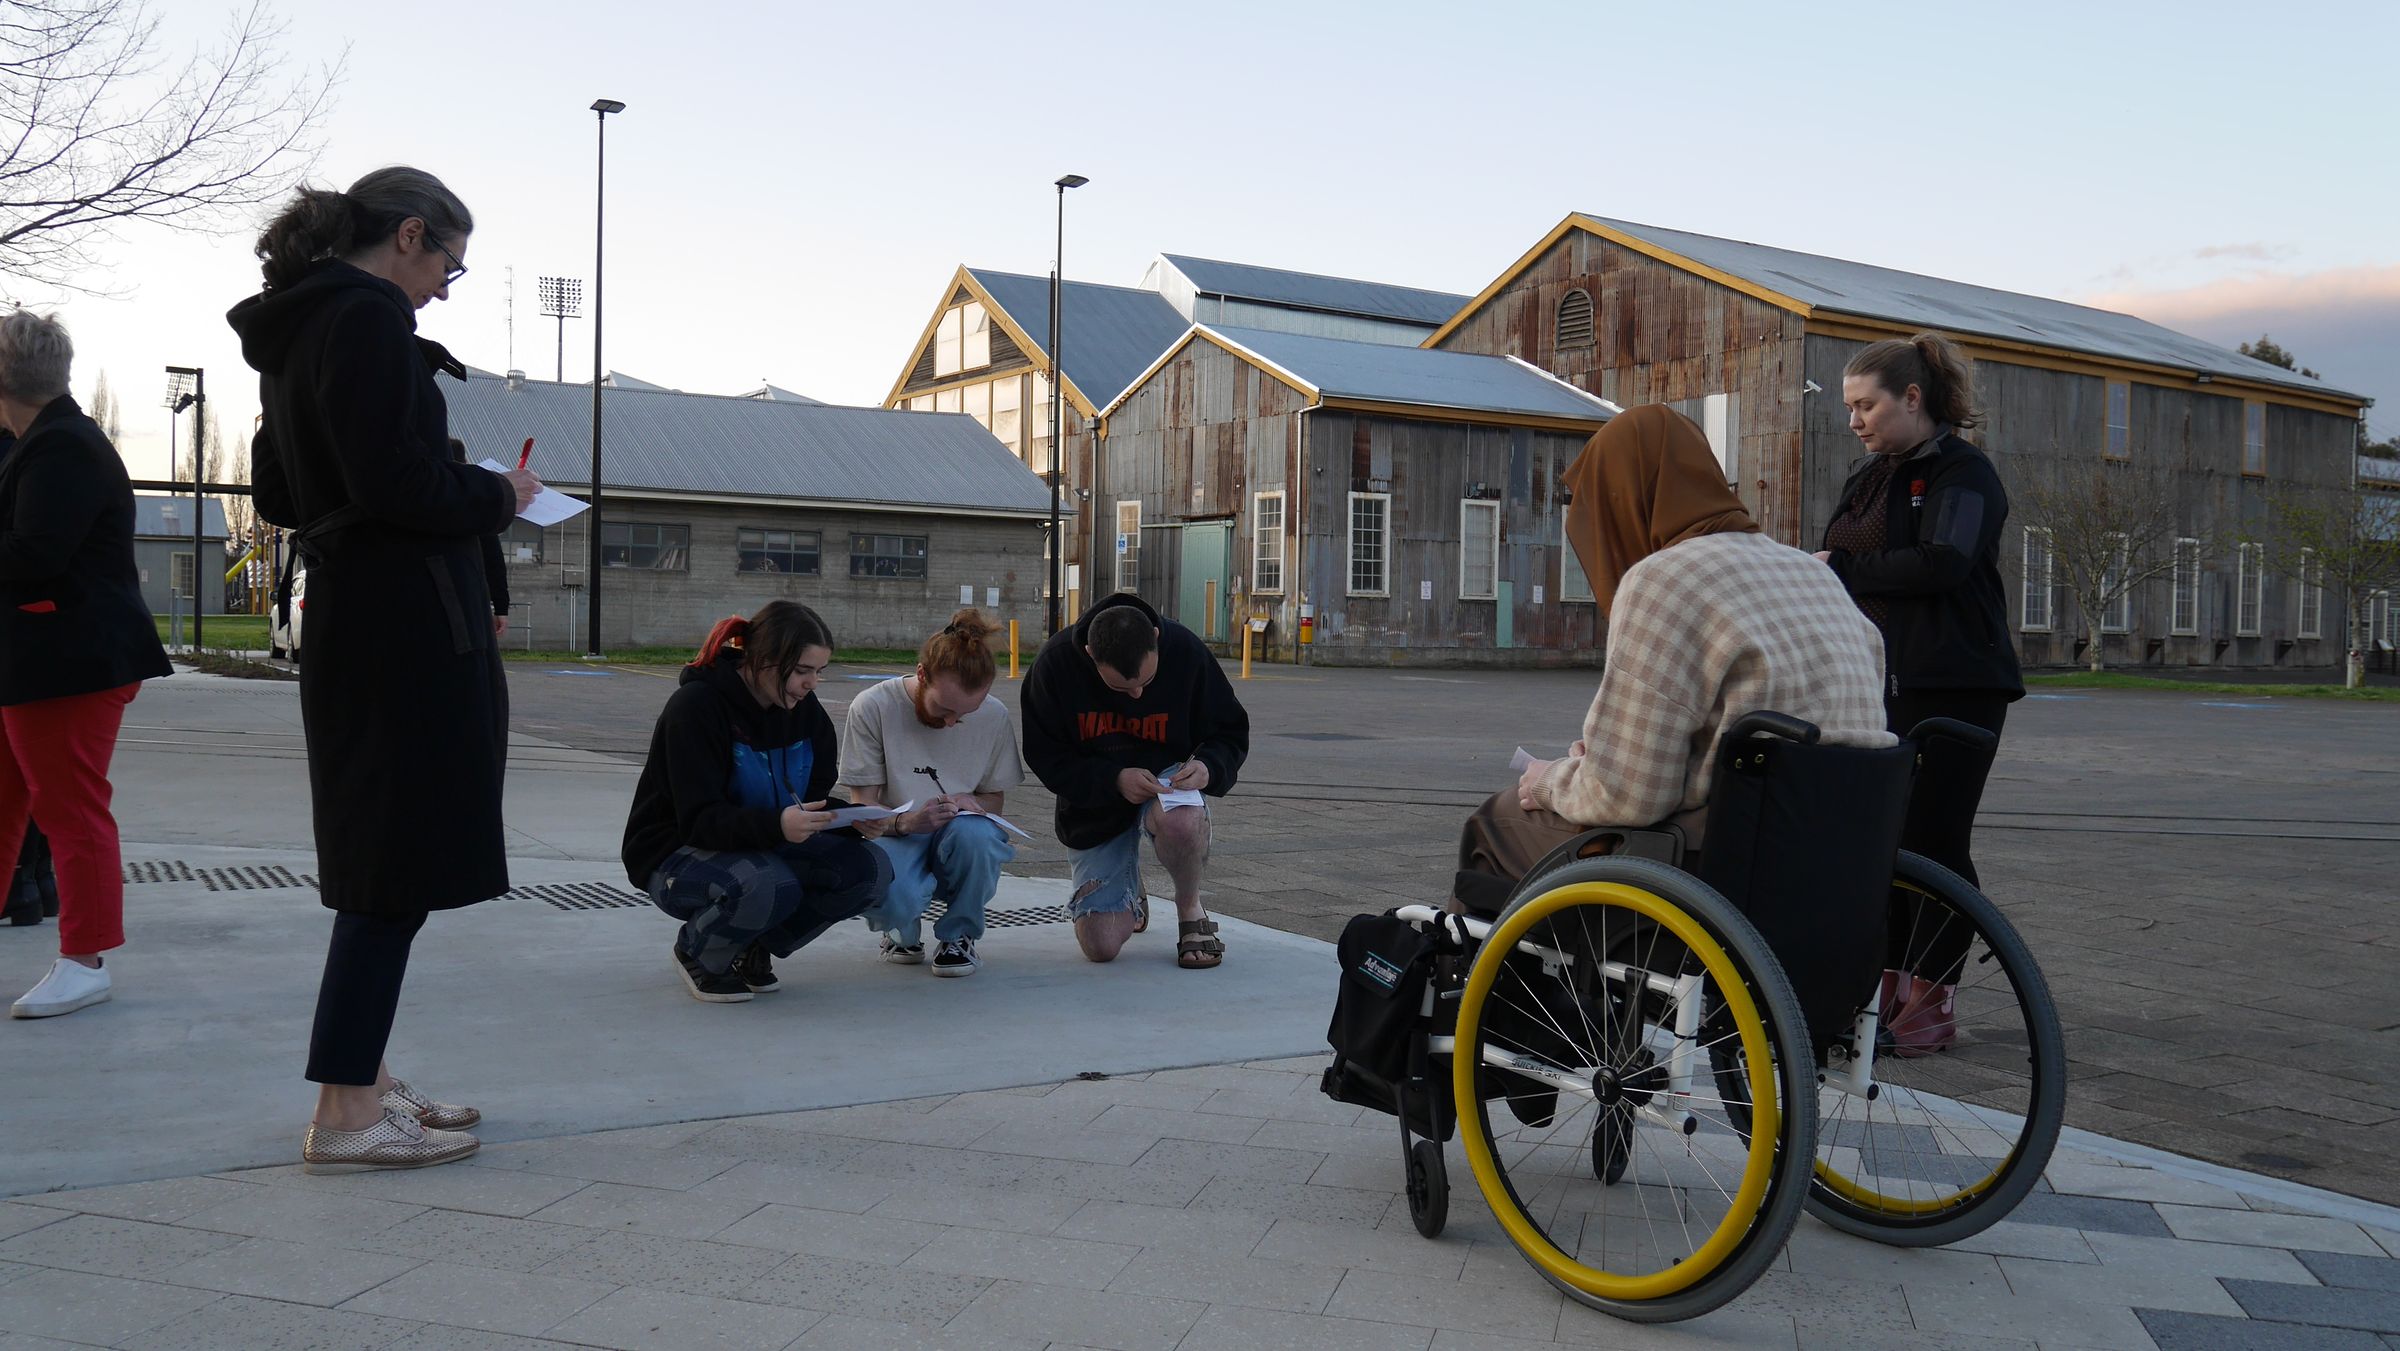 Image of people outside, including someone in a wheelchair.